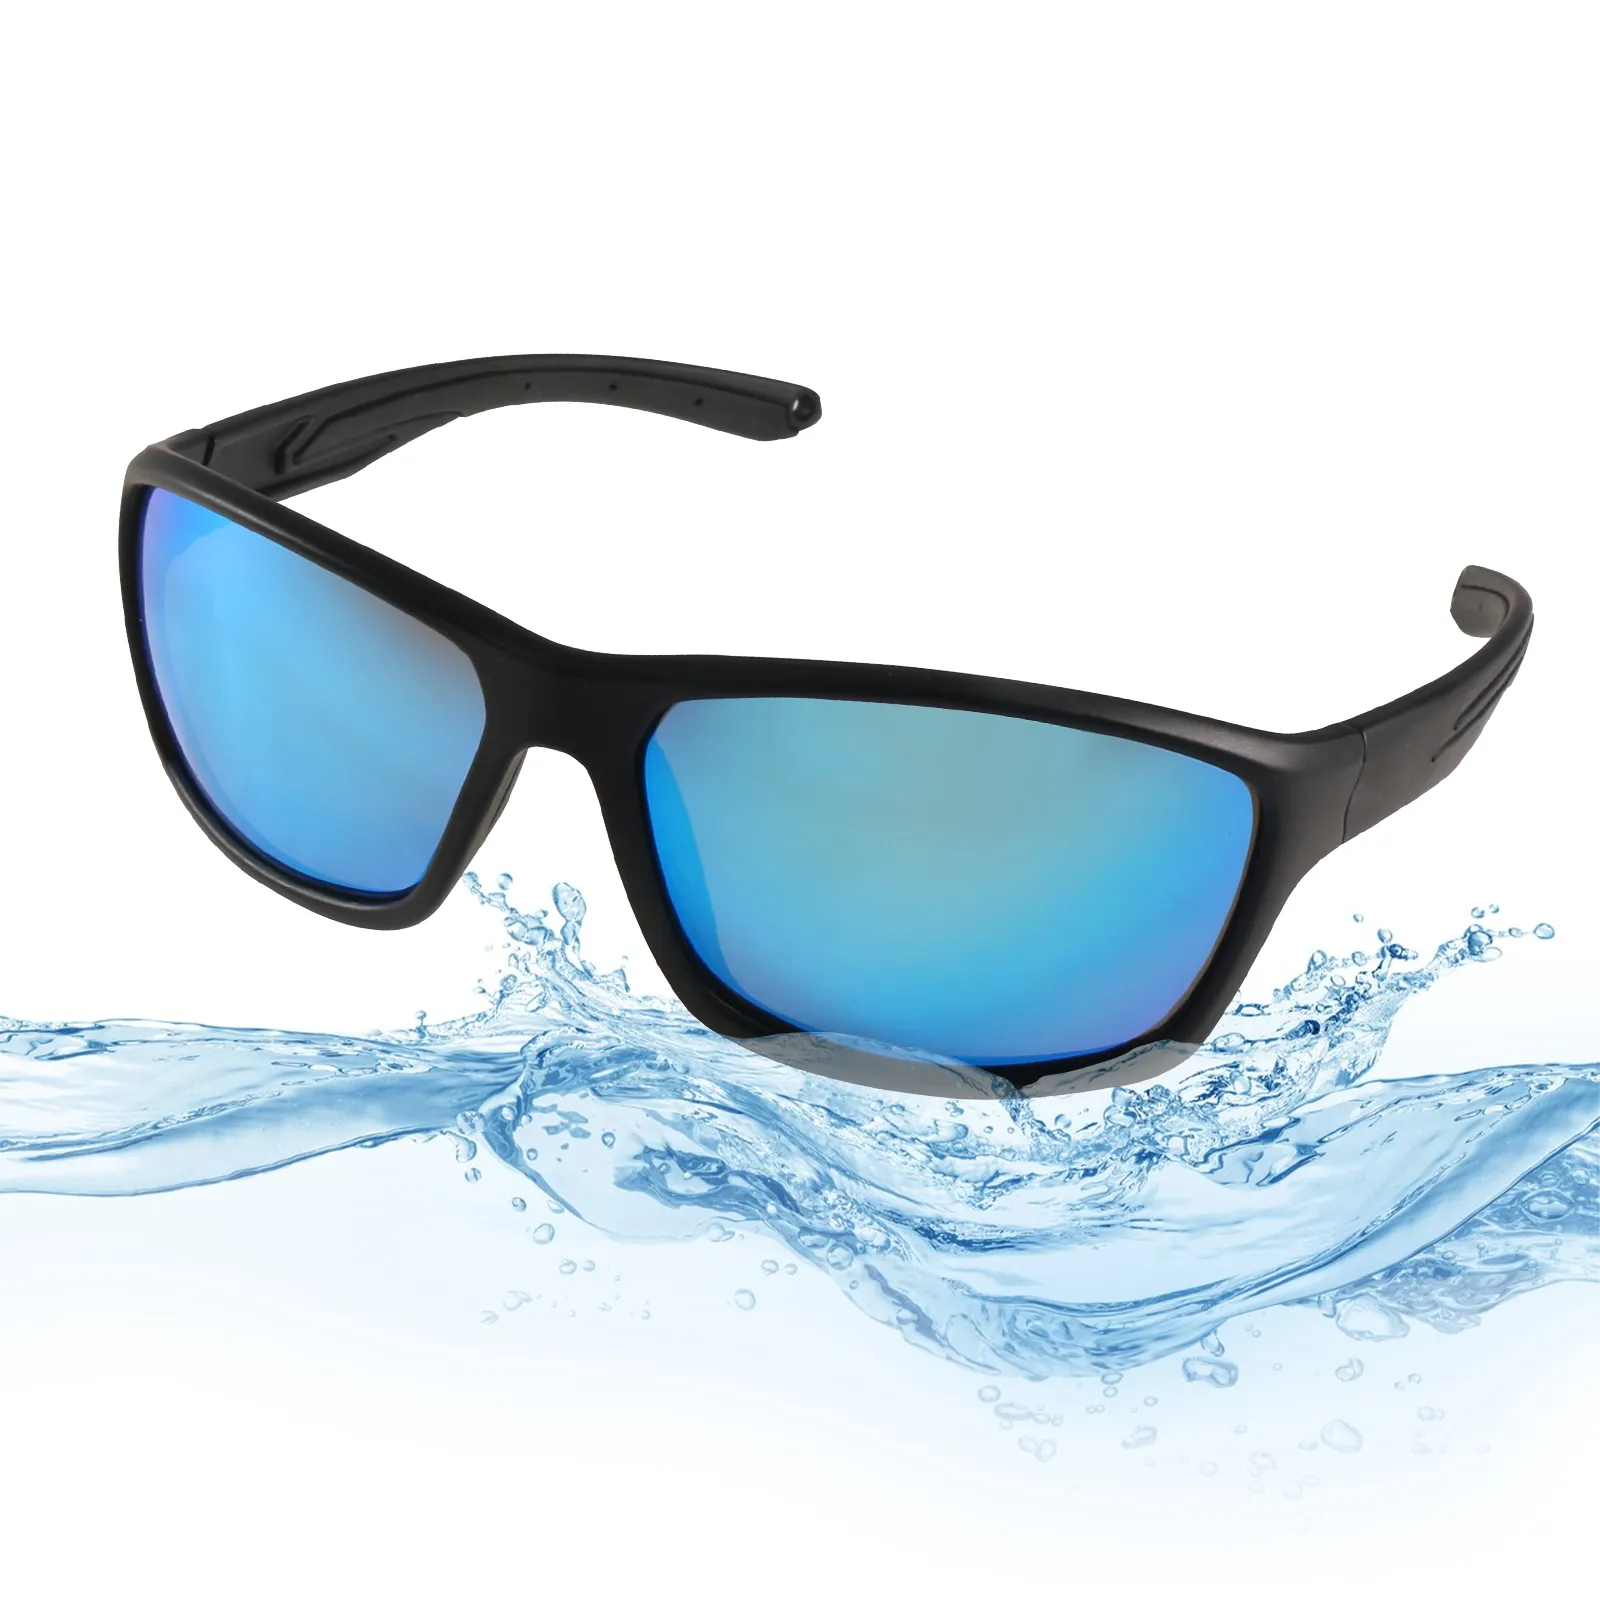 Floating Polarized Fishing Sunglasses for Men Women, Sailing Boating Gifts Beach Cool Style Glasses